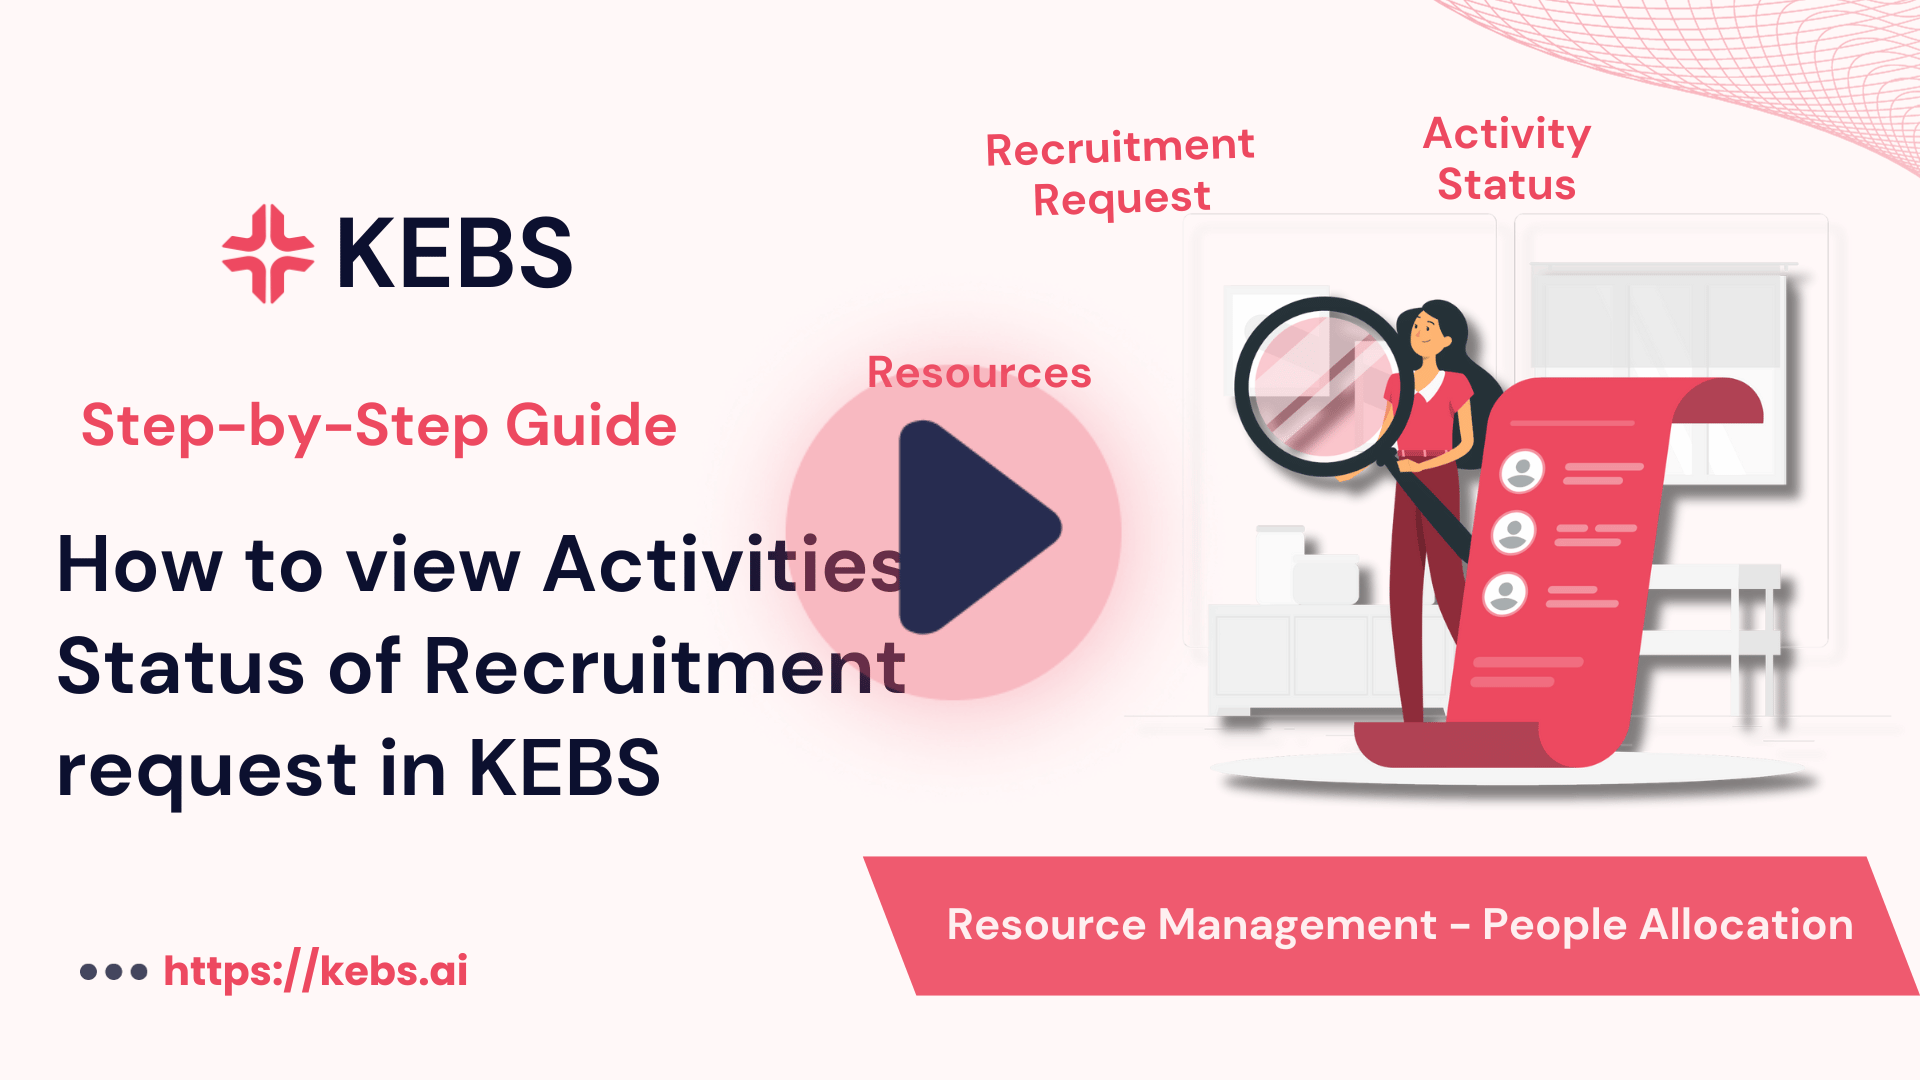 How to view Activities & Status of Recruitment request in KEBS